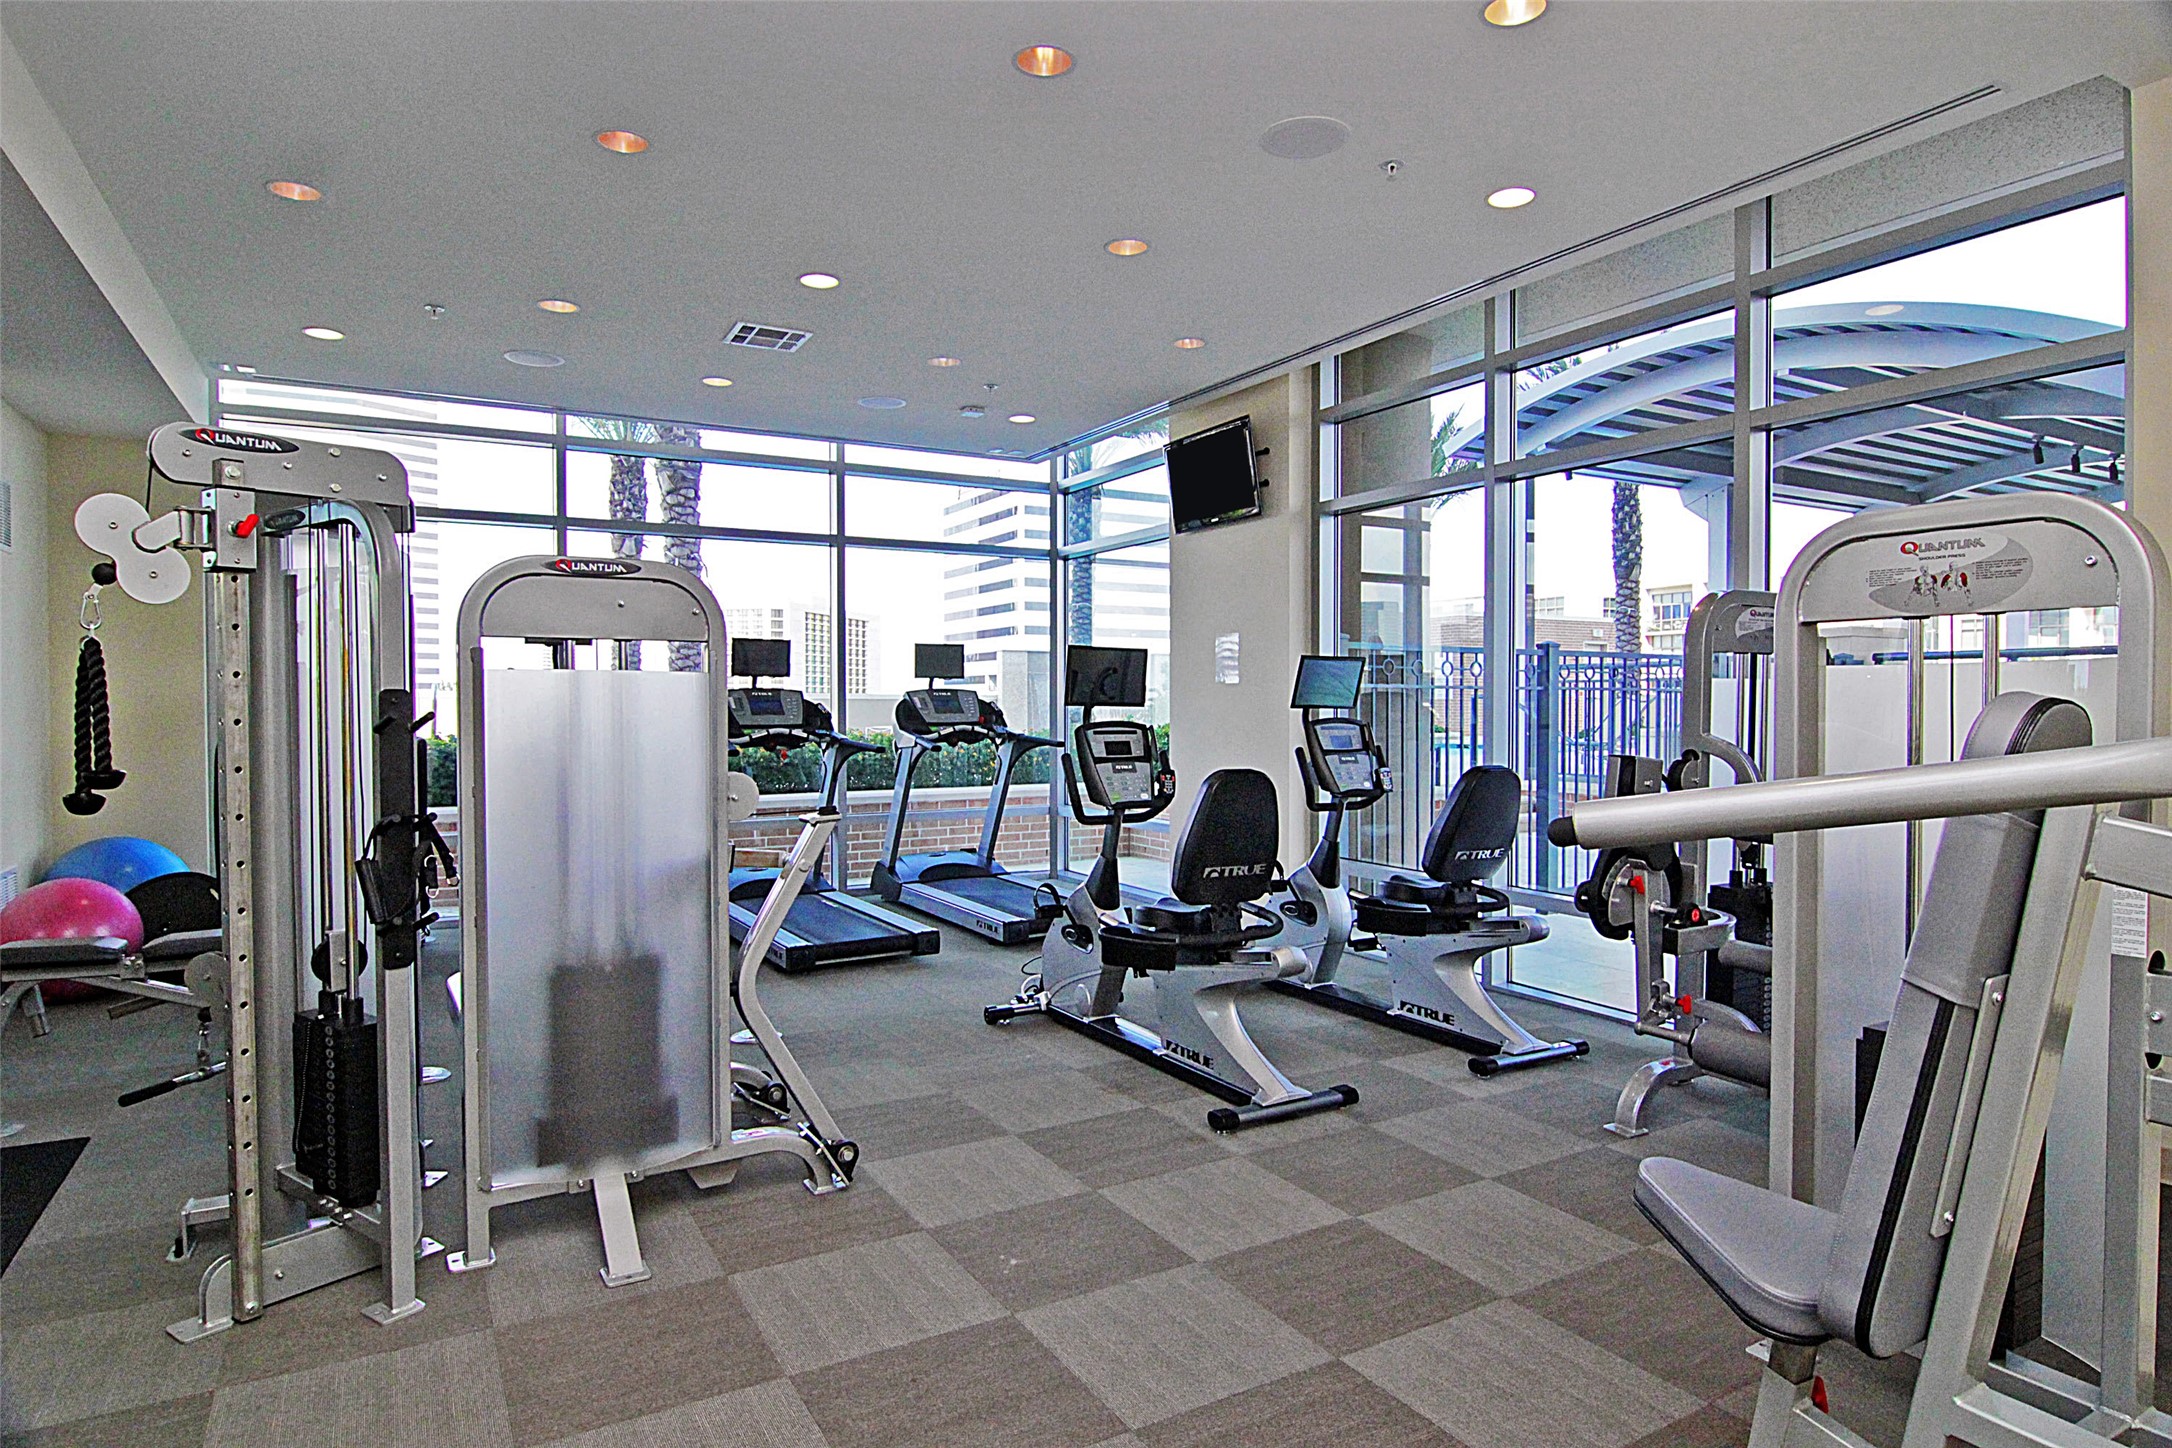 The well equipped gym over looks the pool and cabana.